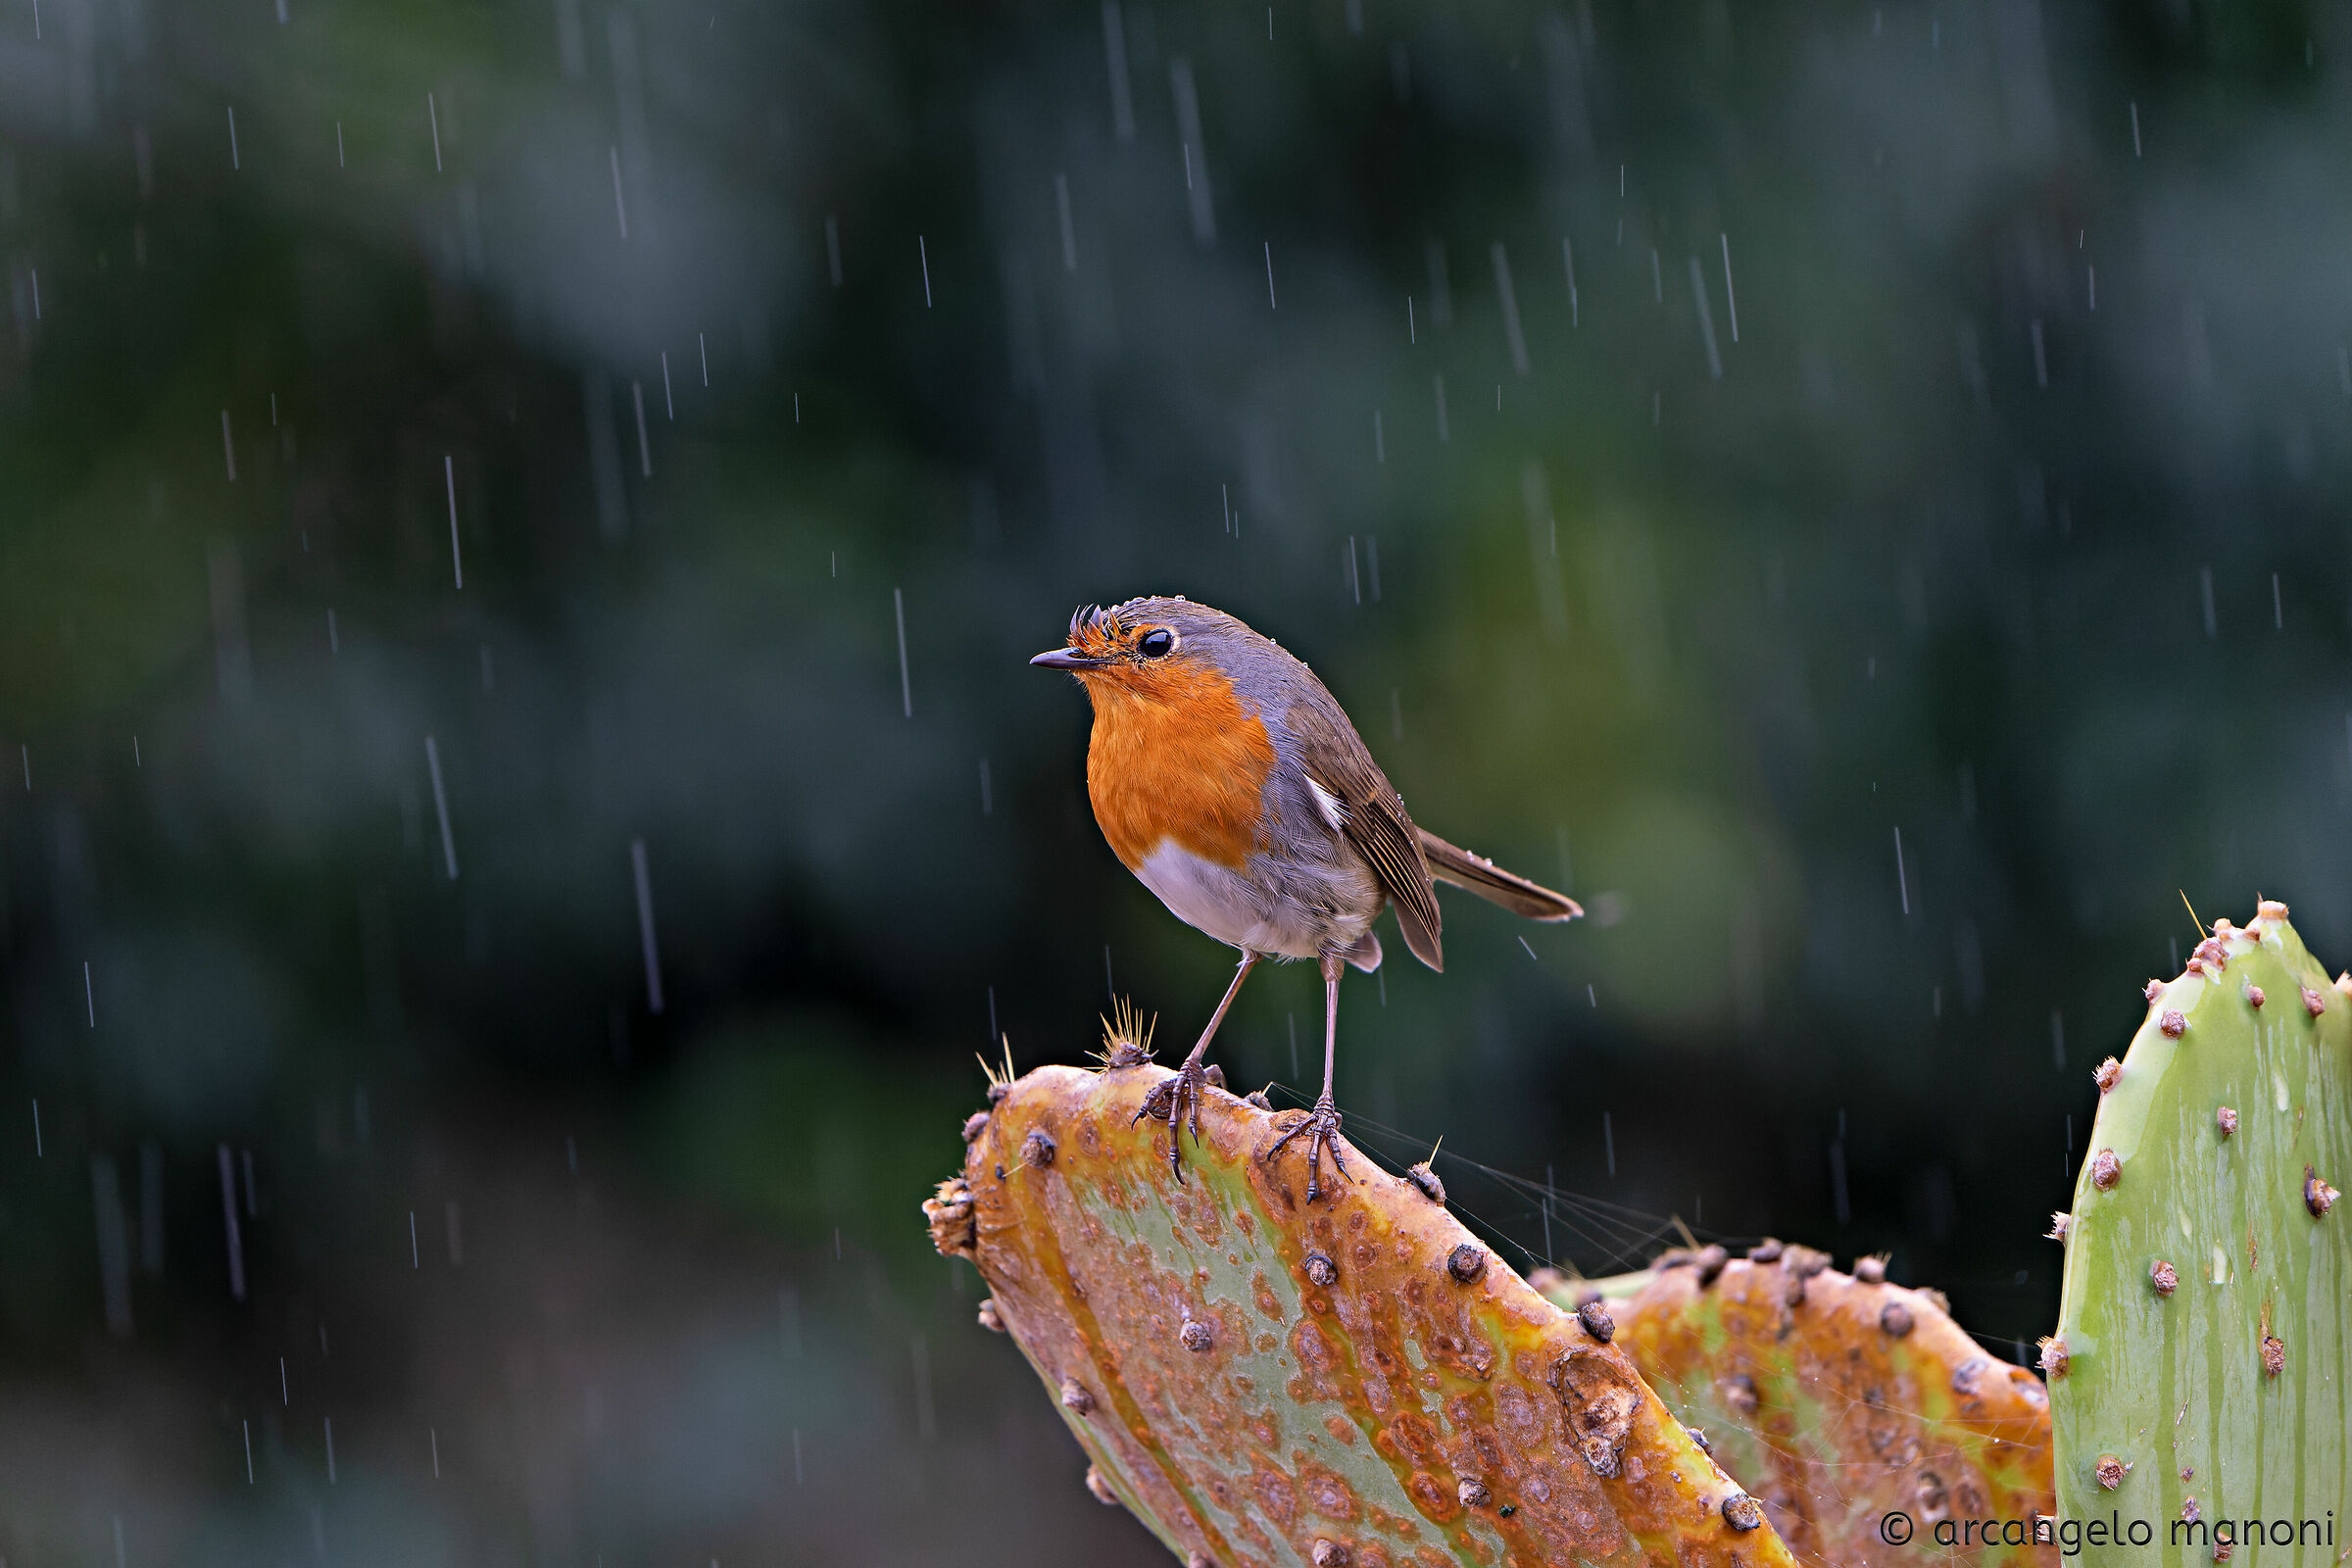 The rain, the robin and the prickly pear...